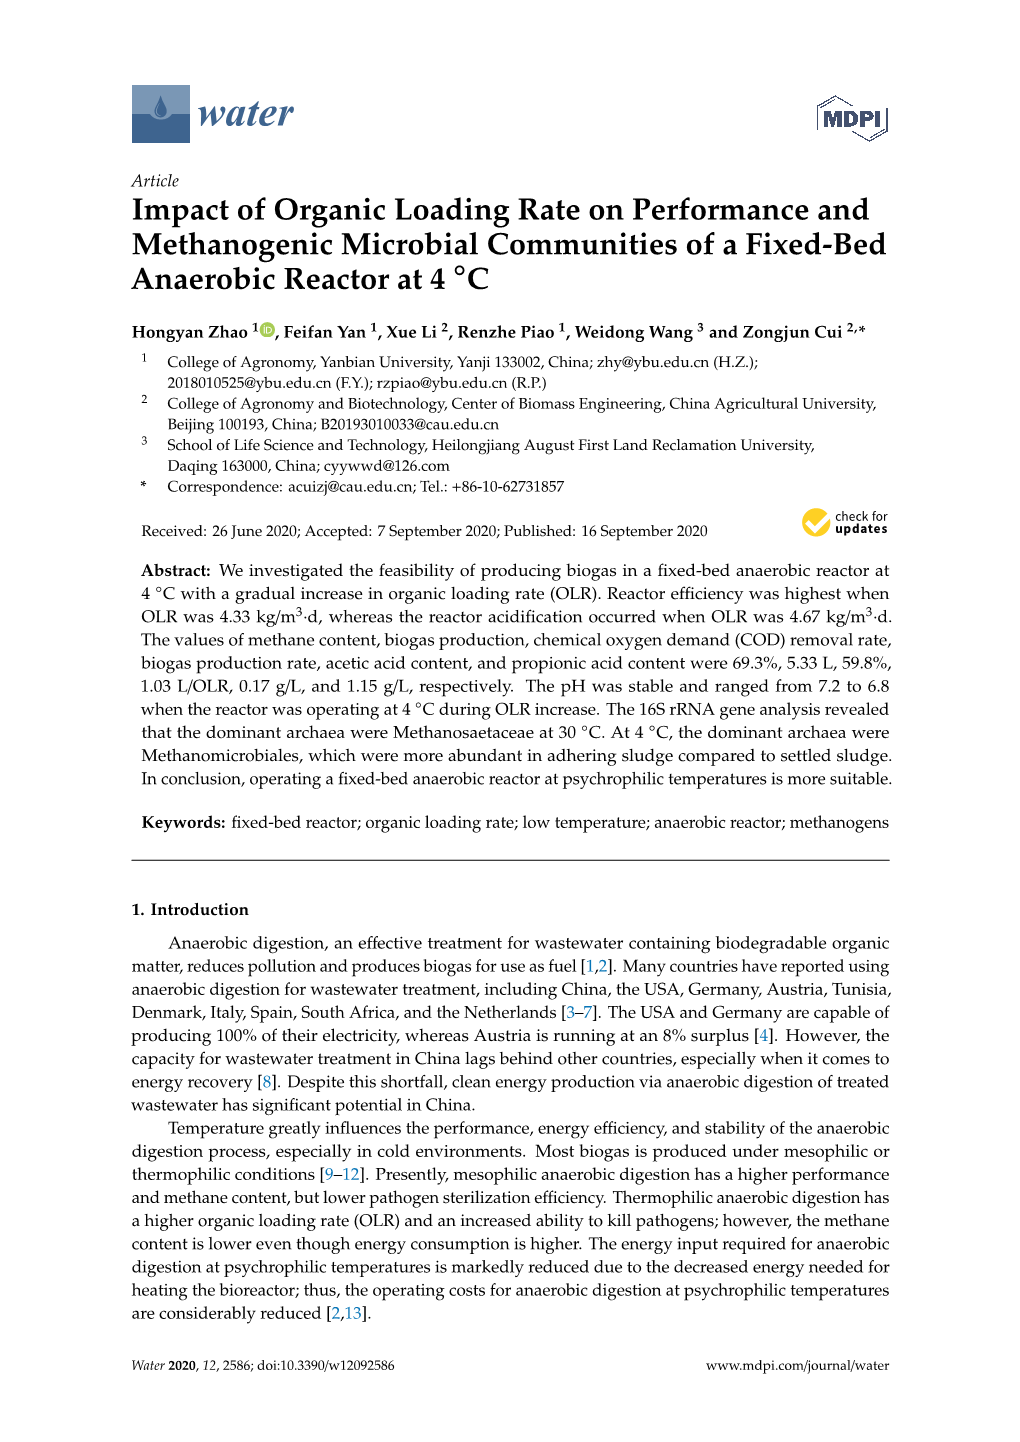 Impact of Organic Loading Rate on Performance and Methanogenic Microbial Communities of a Fixed-Bed ◦ Anaerobic Reactor at 4 C